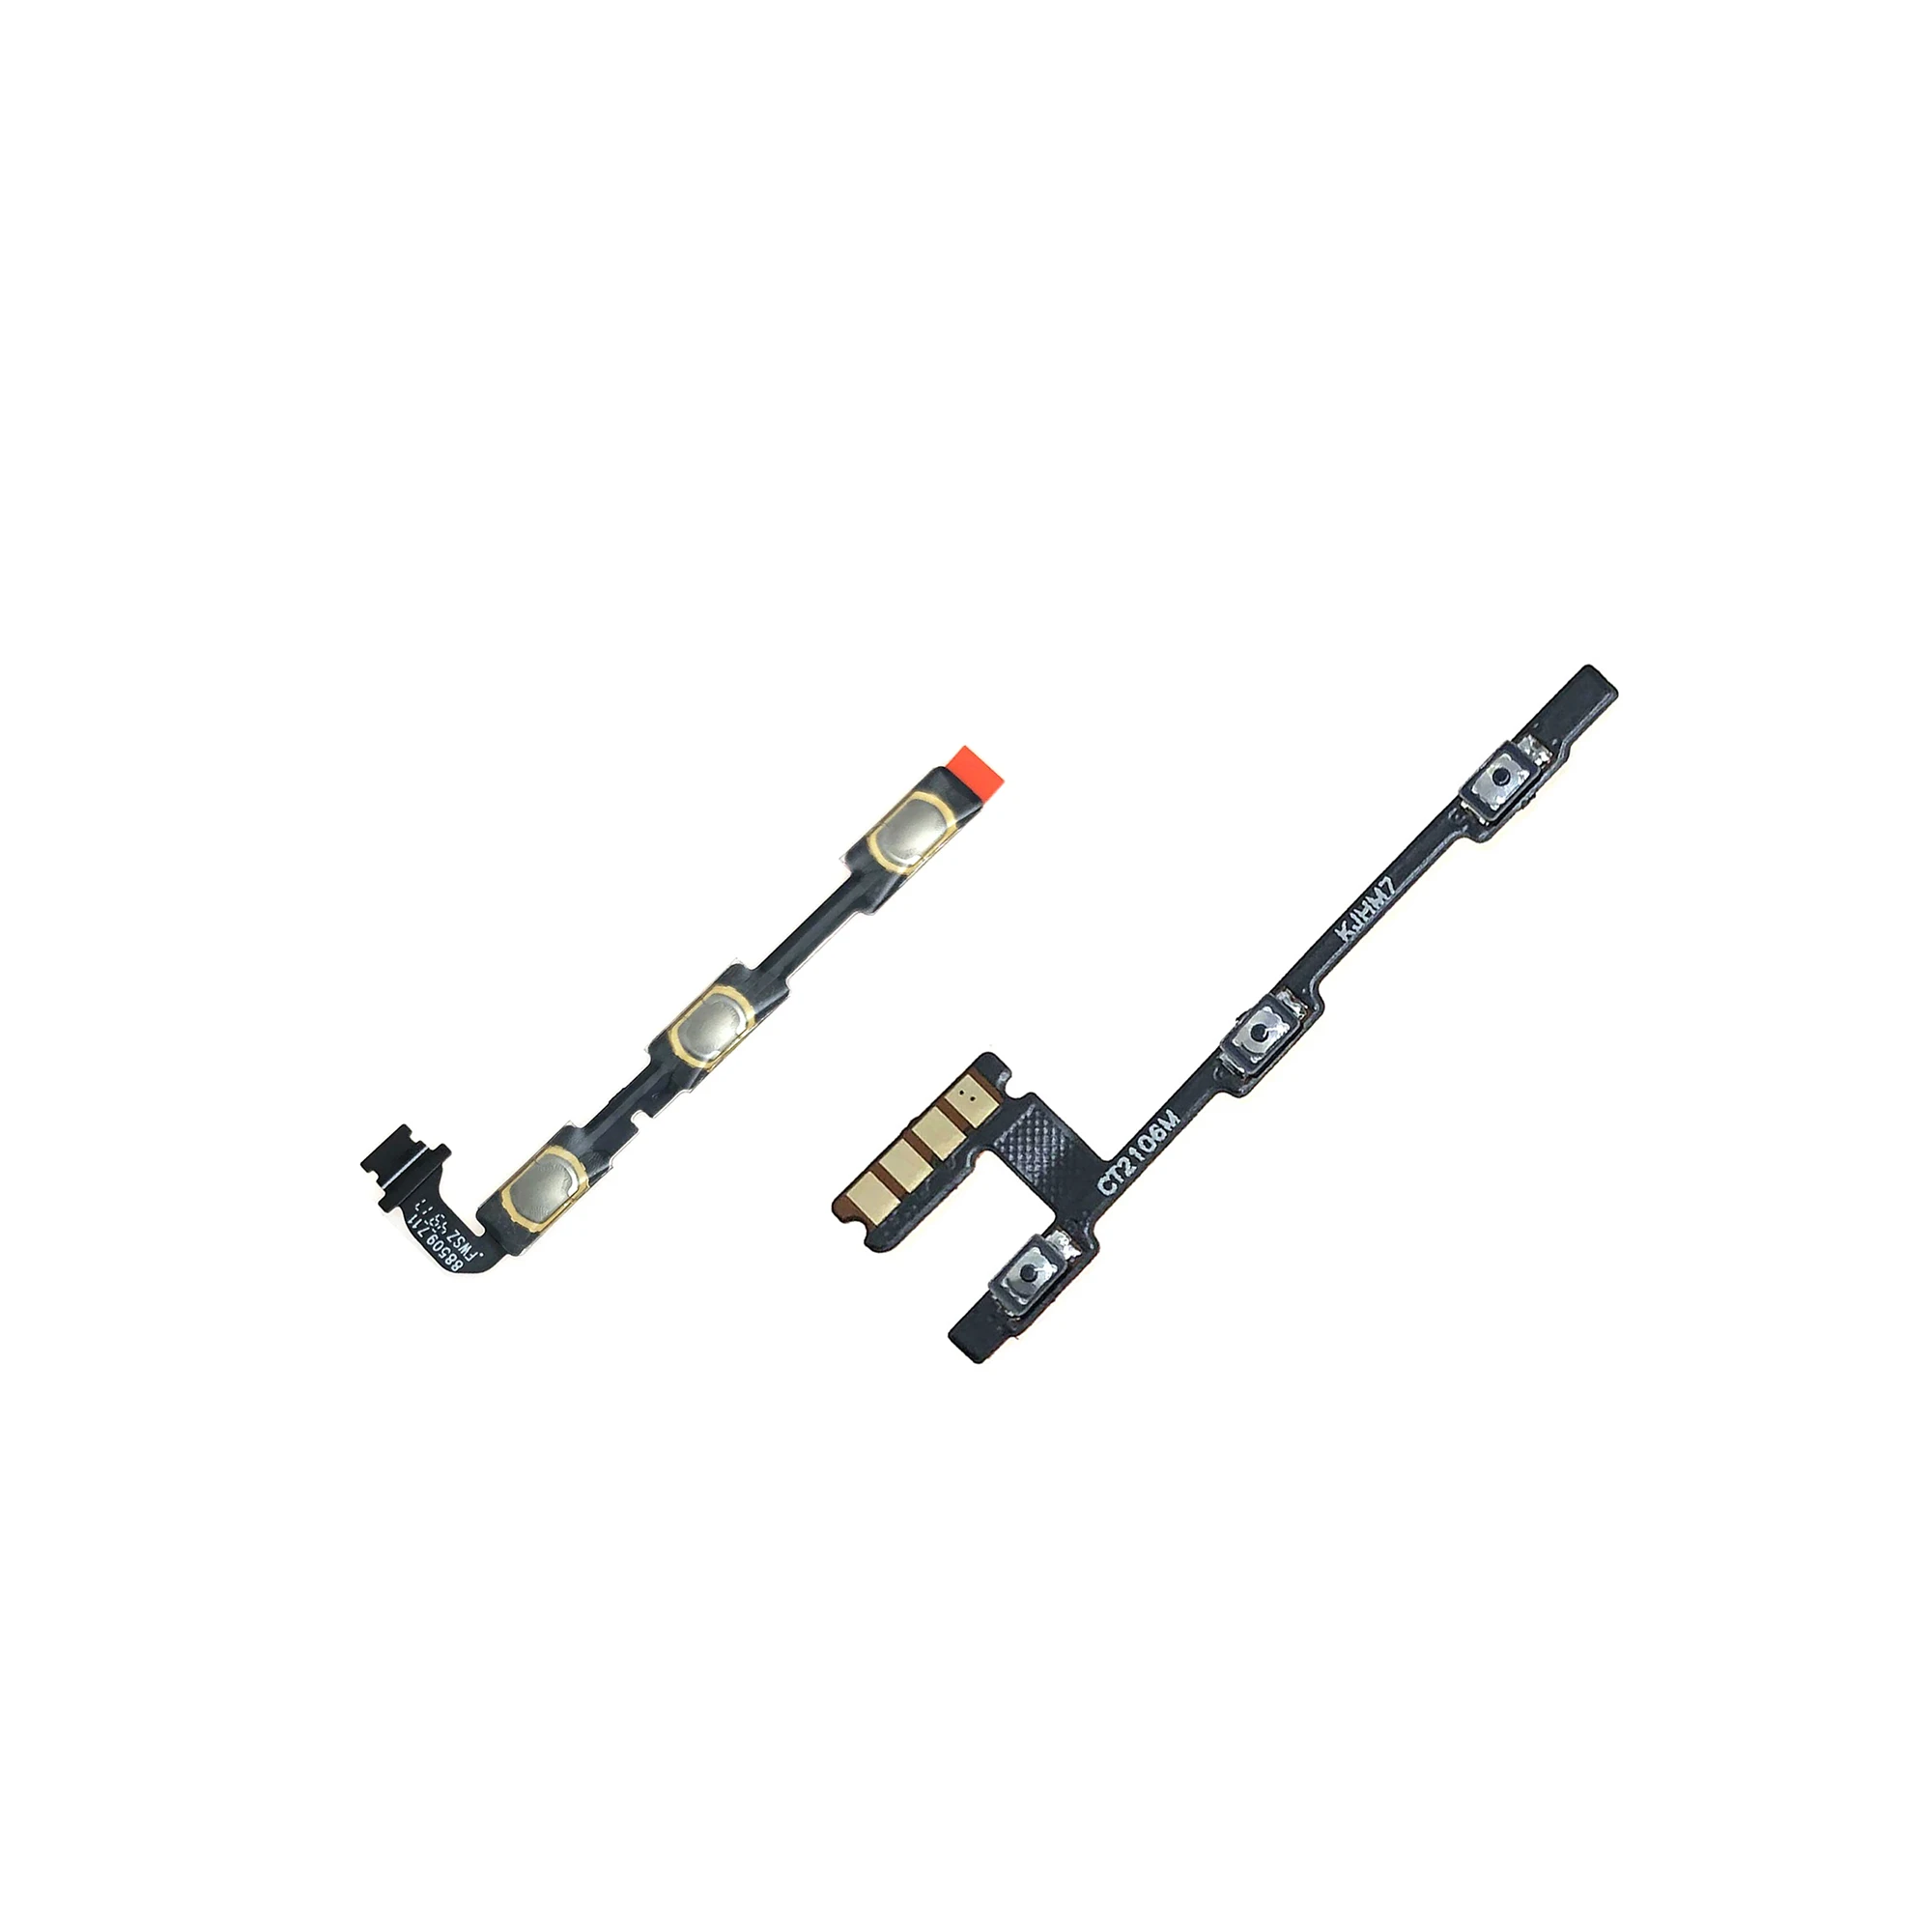 

Power On Off Volume Button Flex Cable For Xiaomi Redmi 3 3S 3X 3Pro 4X 4A 4 Pro 5 5A 5 Plus 6 6A 6Pro 7 7A 8 Switch Key Control